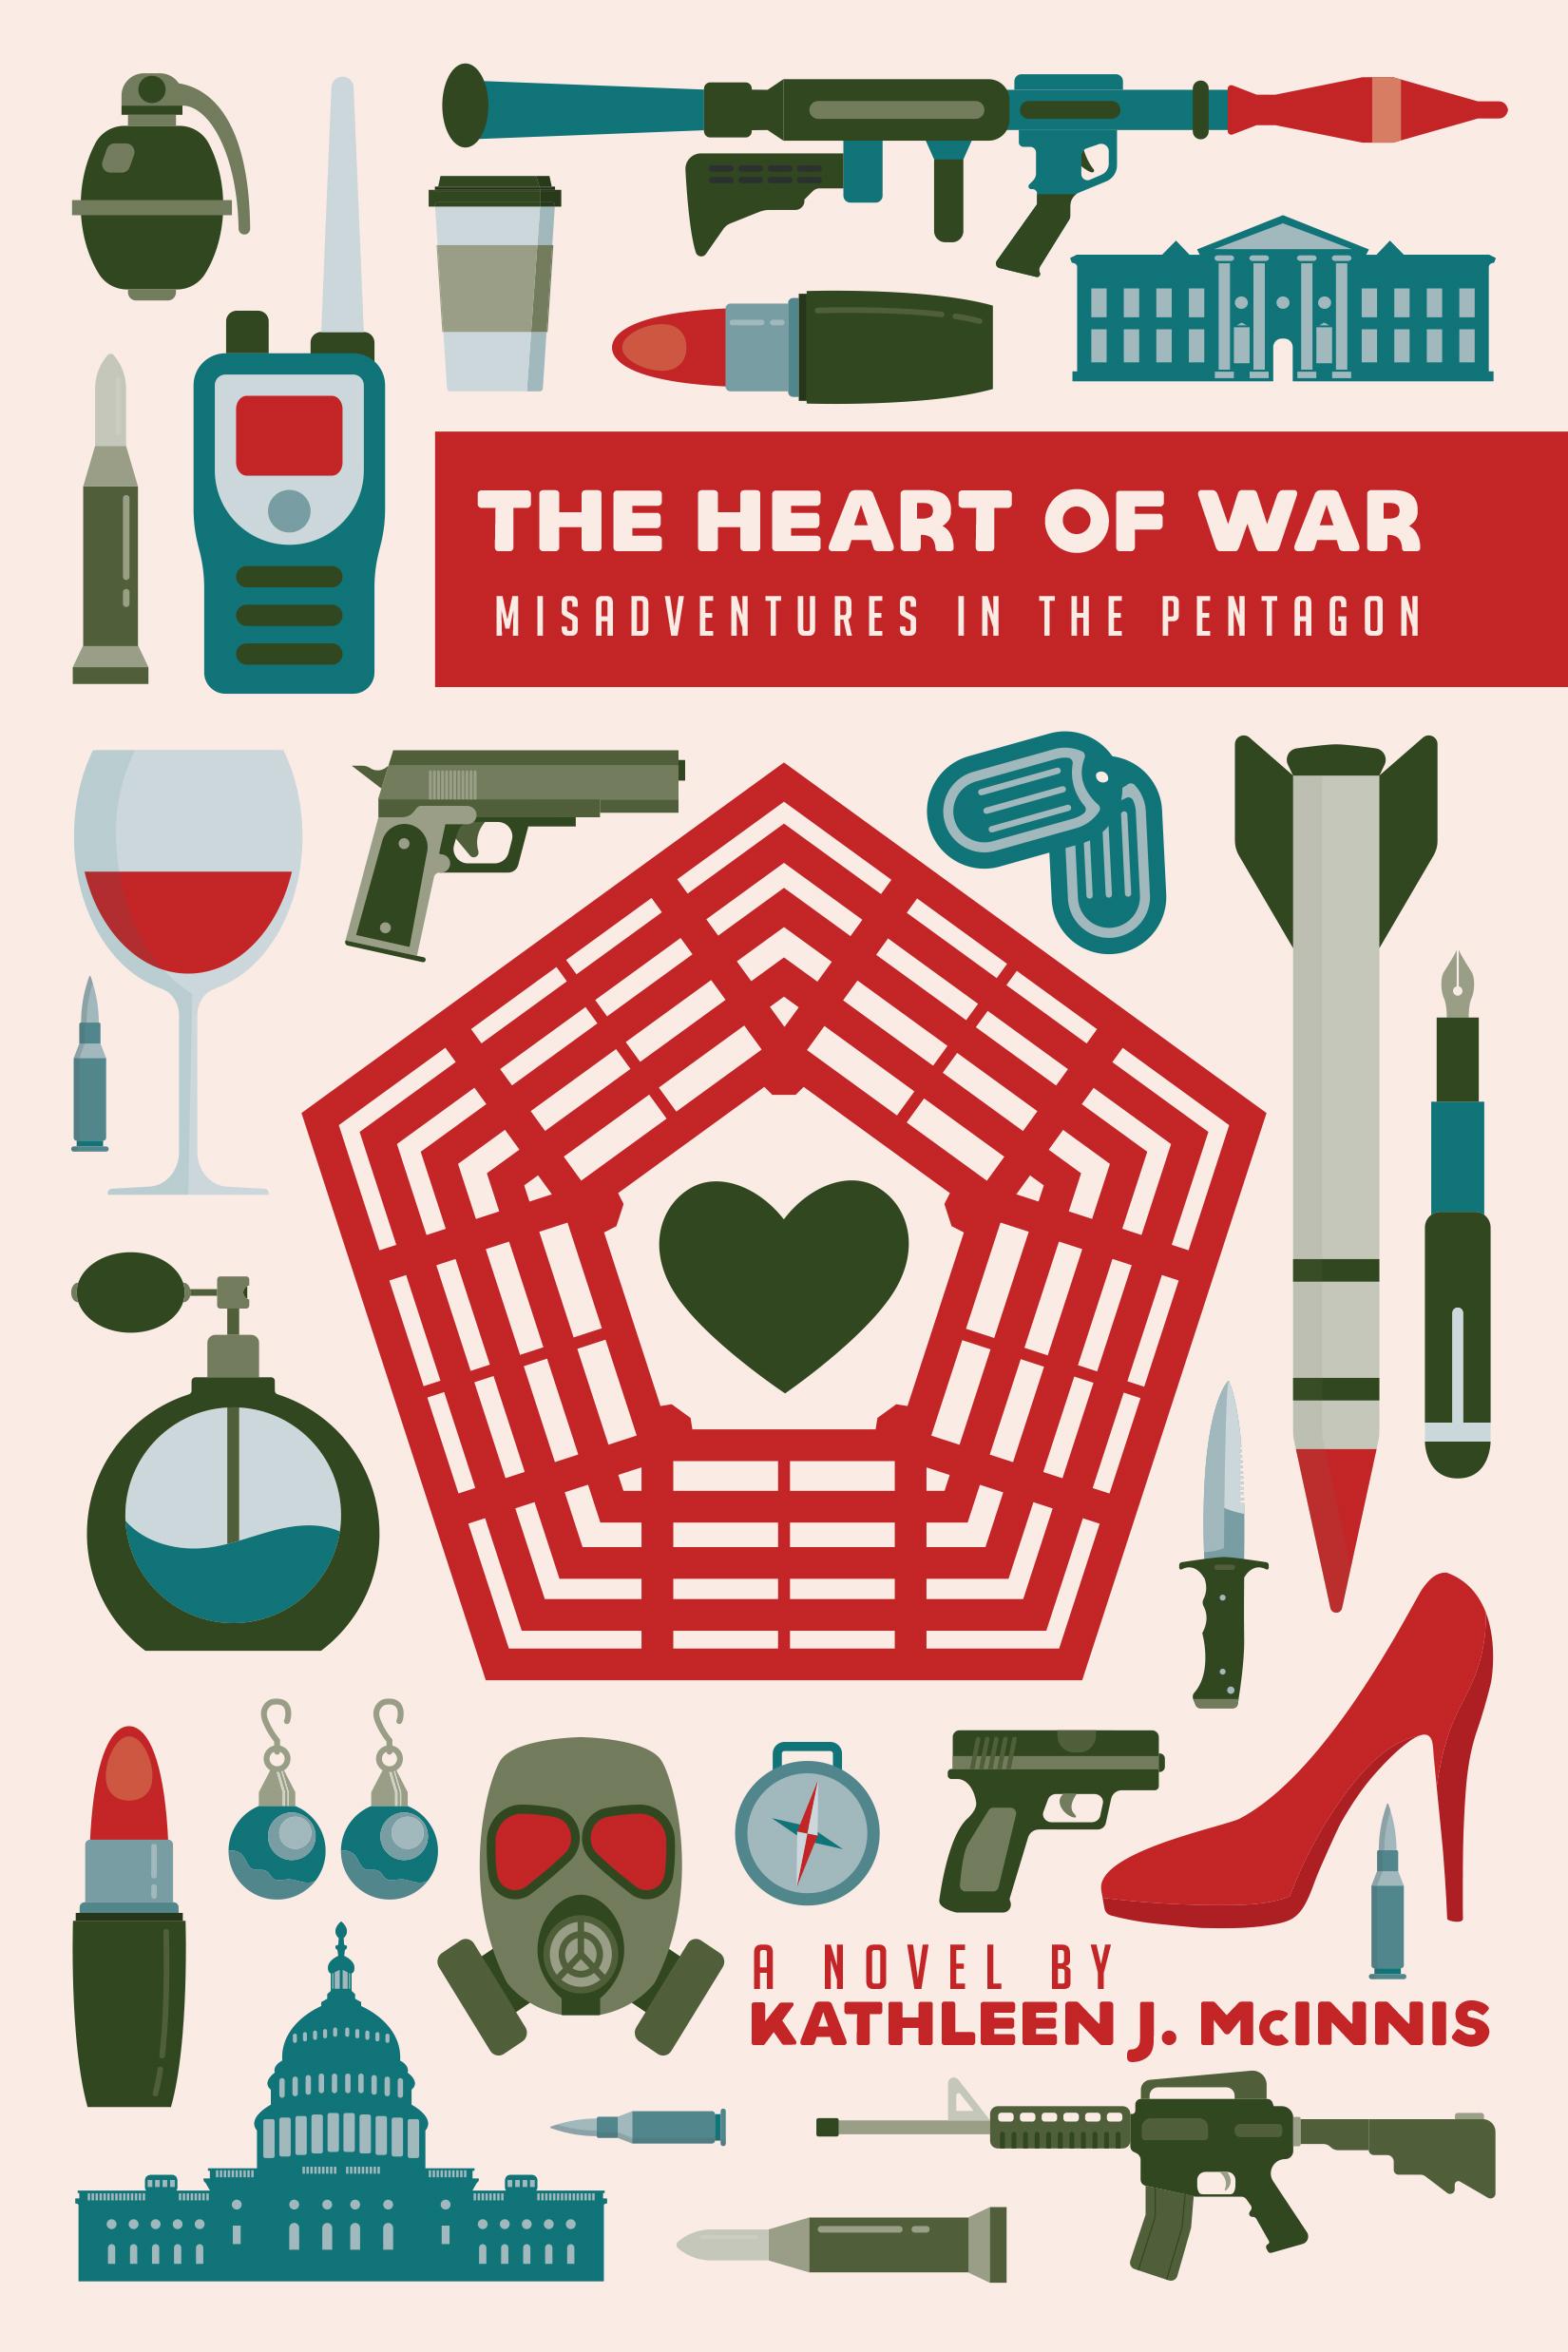 Green Red Pentagon Logo - BOOK LAUNCH! author Kathleen McInnis and THE HEART OF WAR